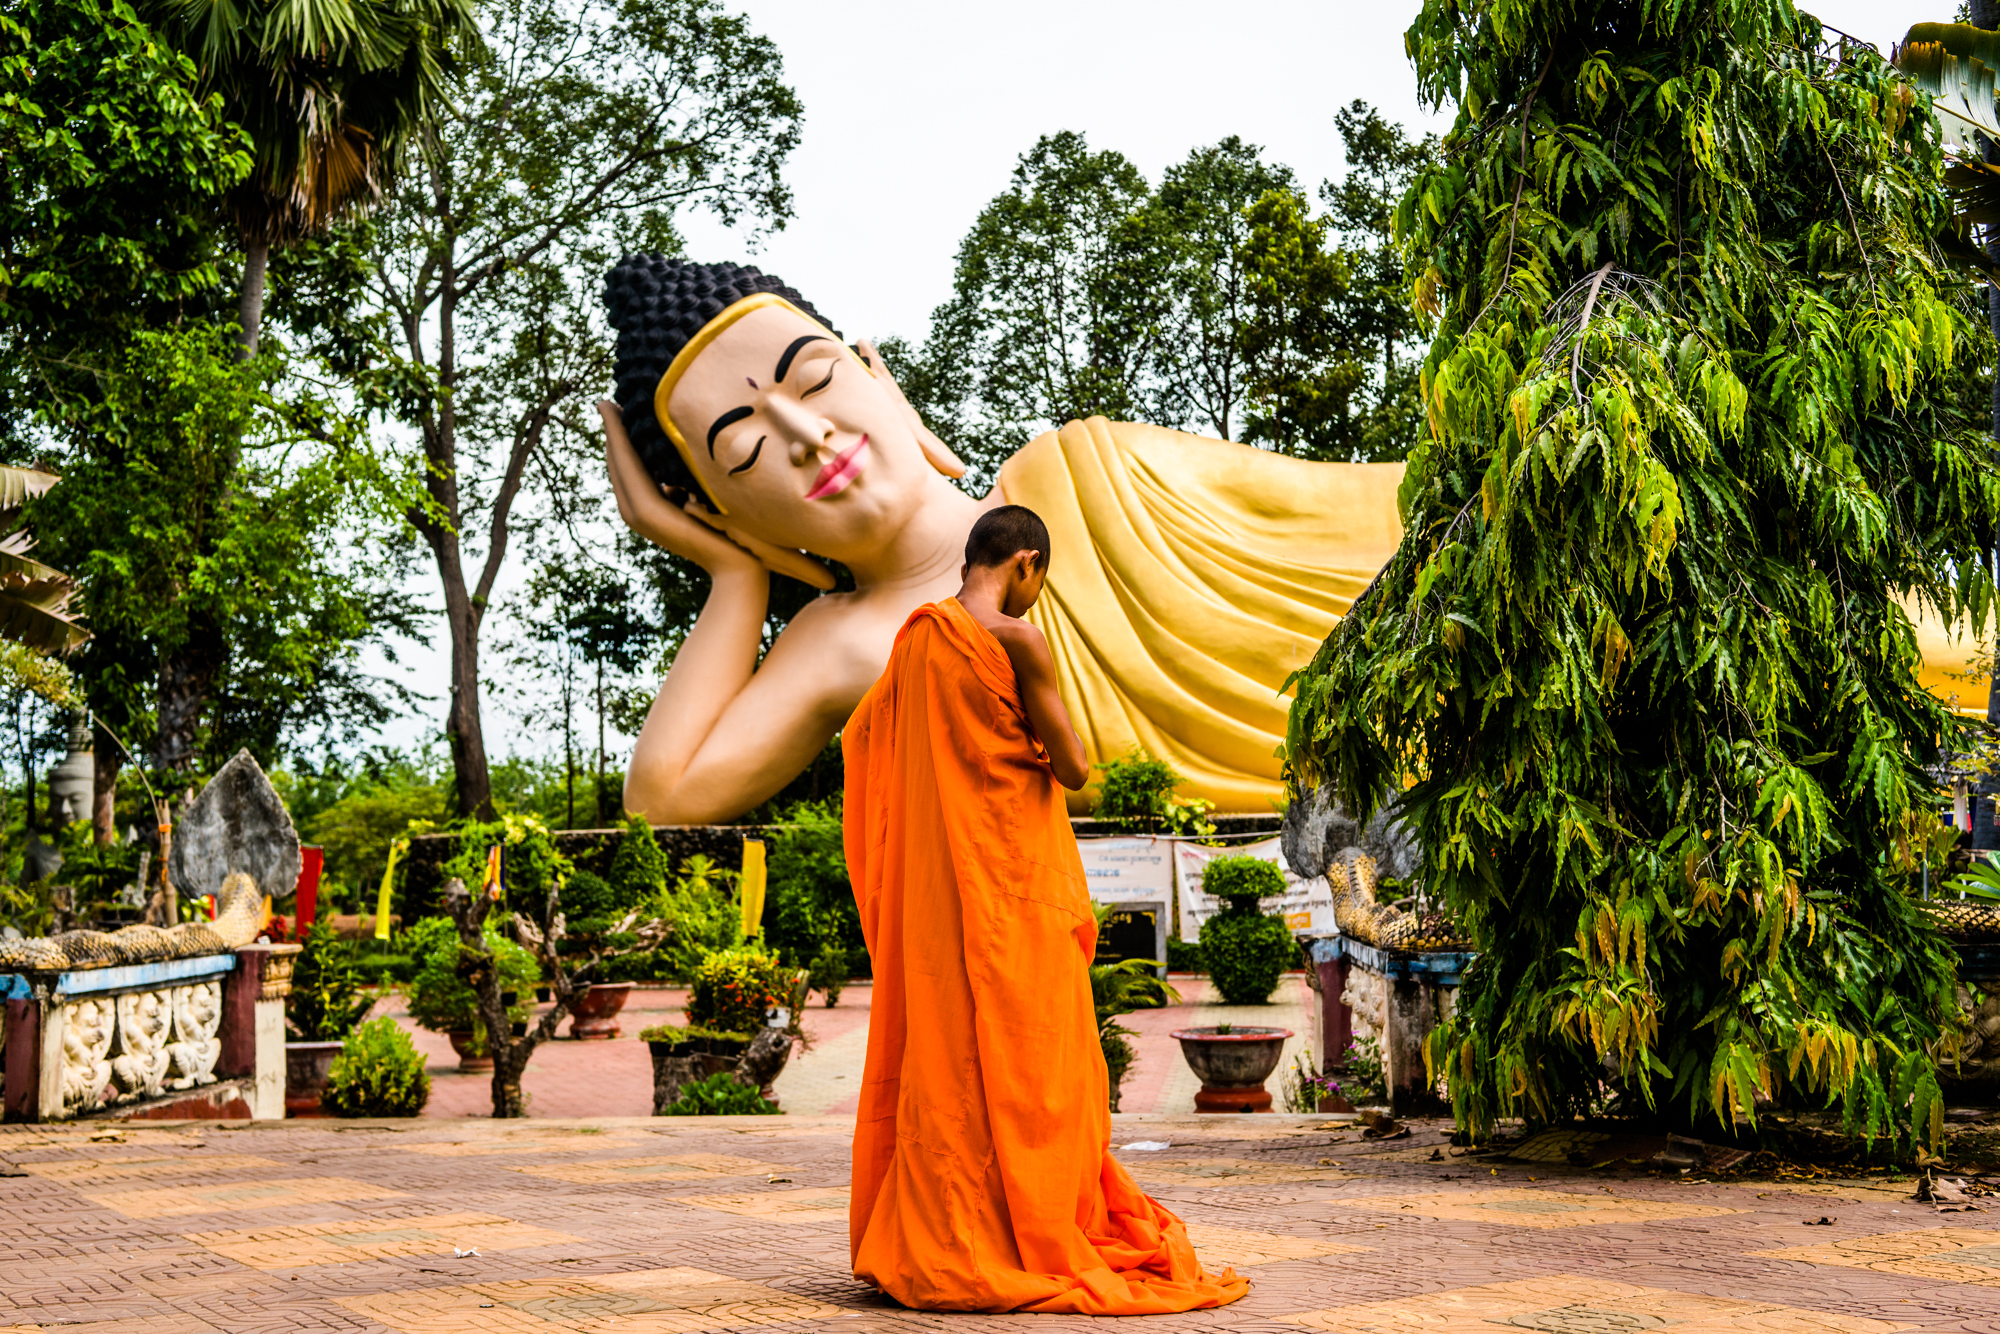 A novice monk passes in front of a large Buddah statue in Prey Nokkor Knung, Cambodia